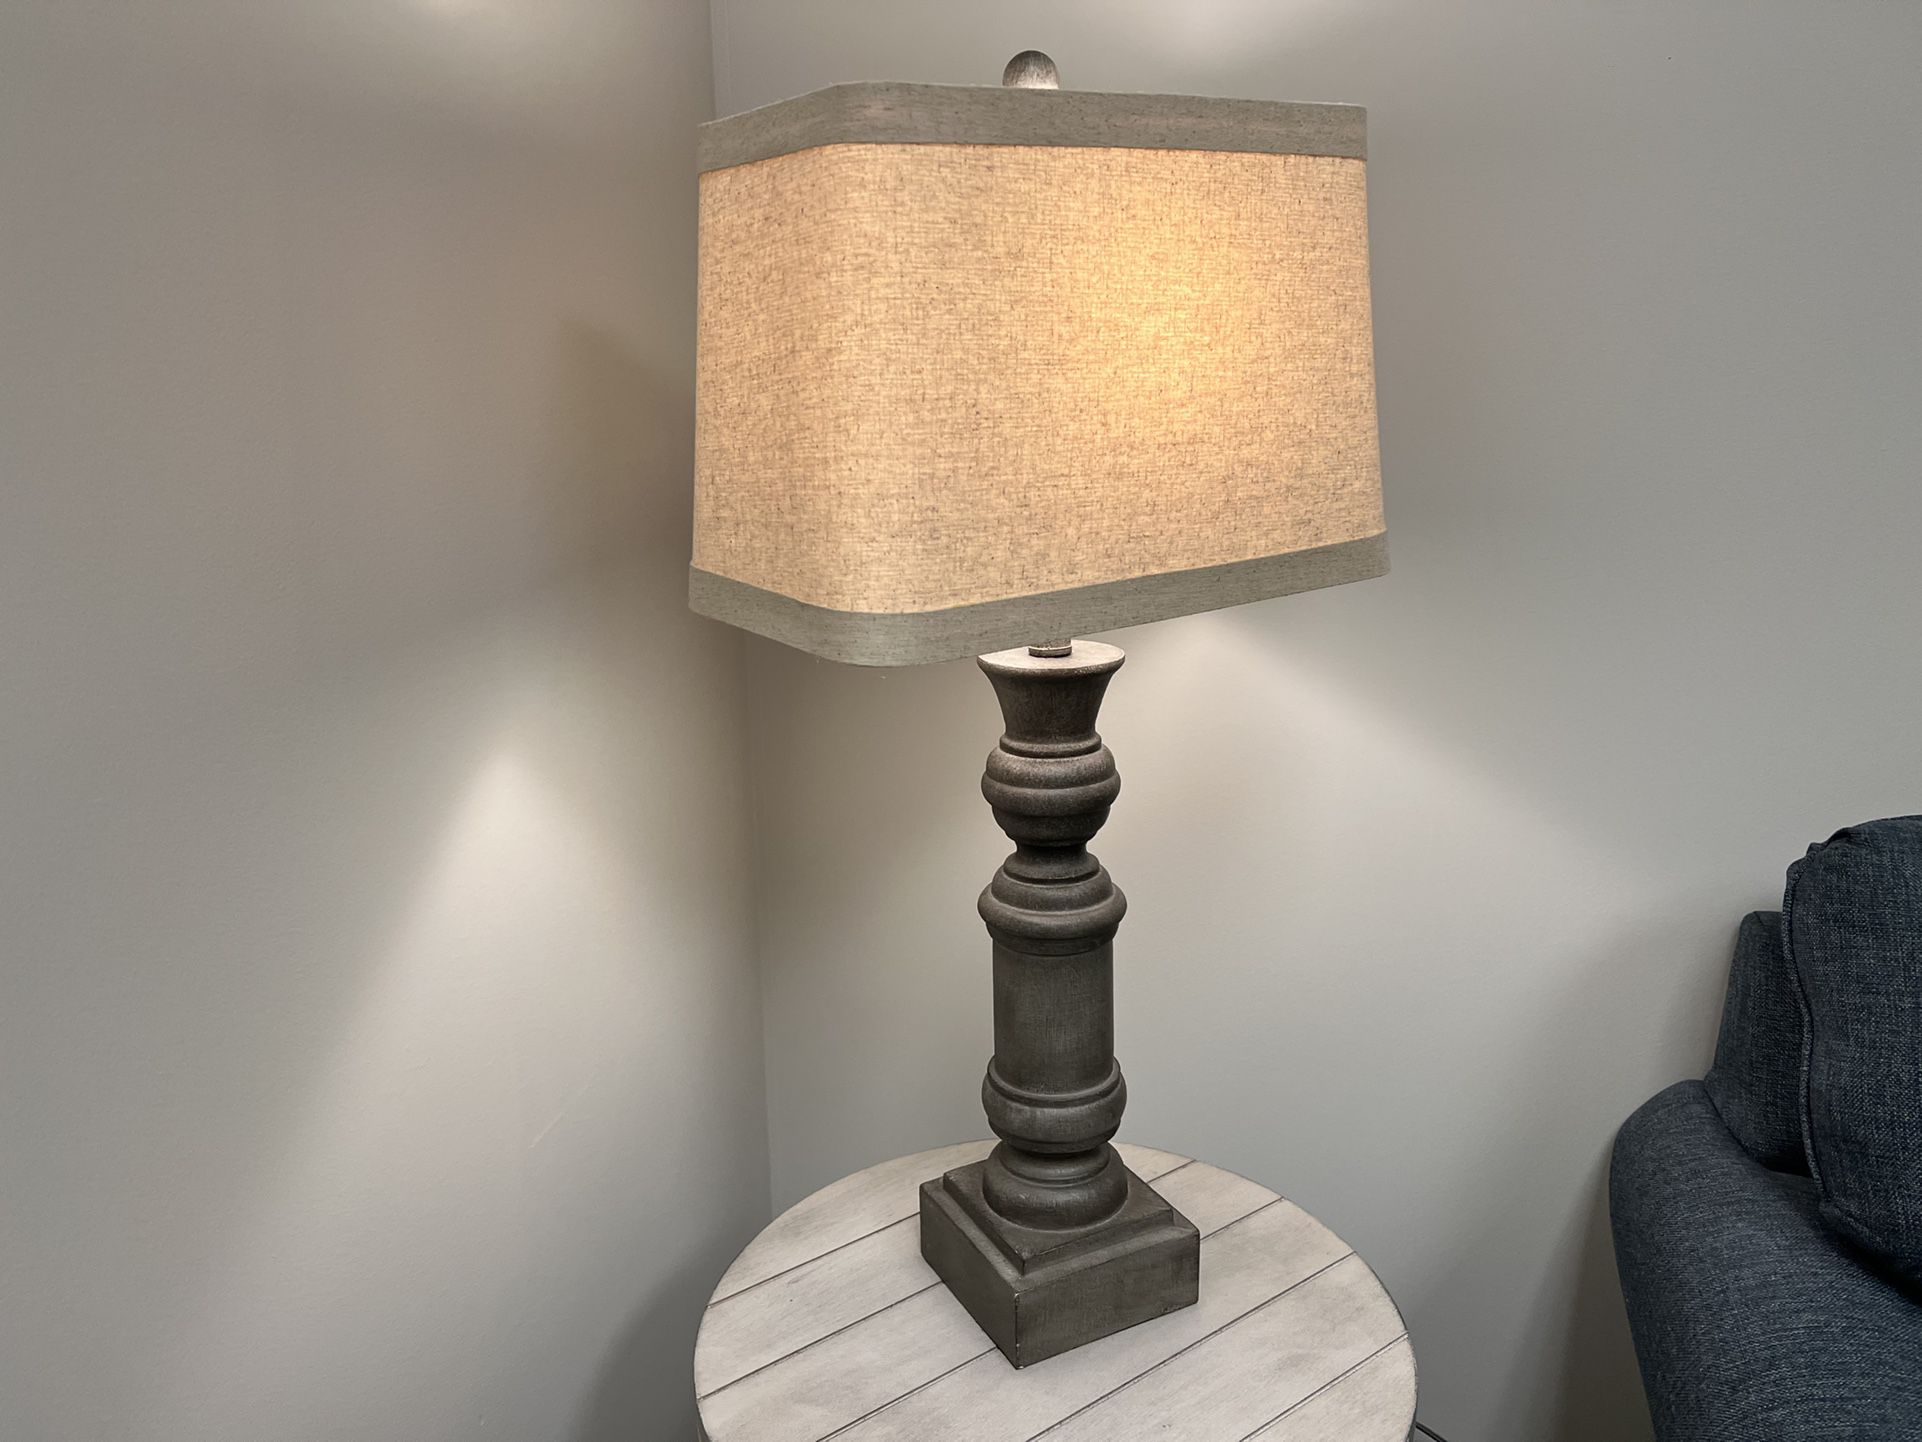 Table / Desk Lamp with Shade